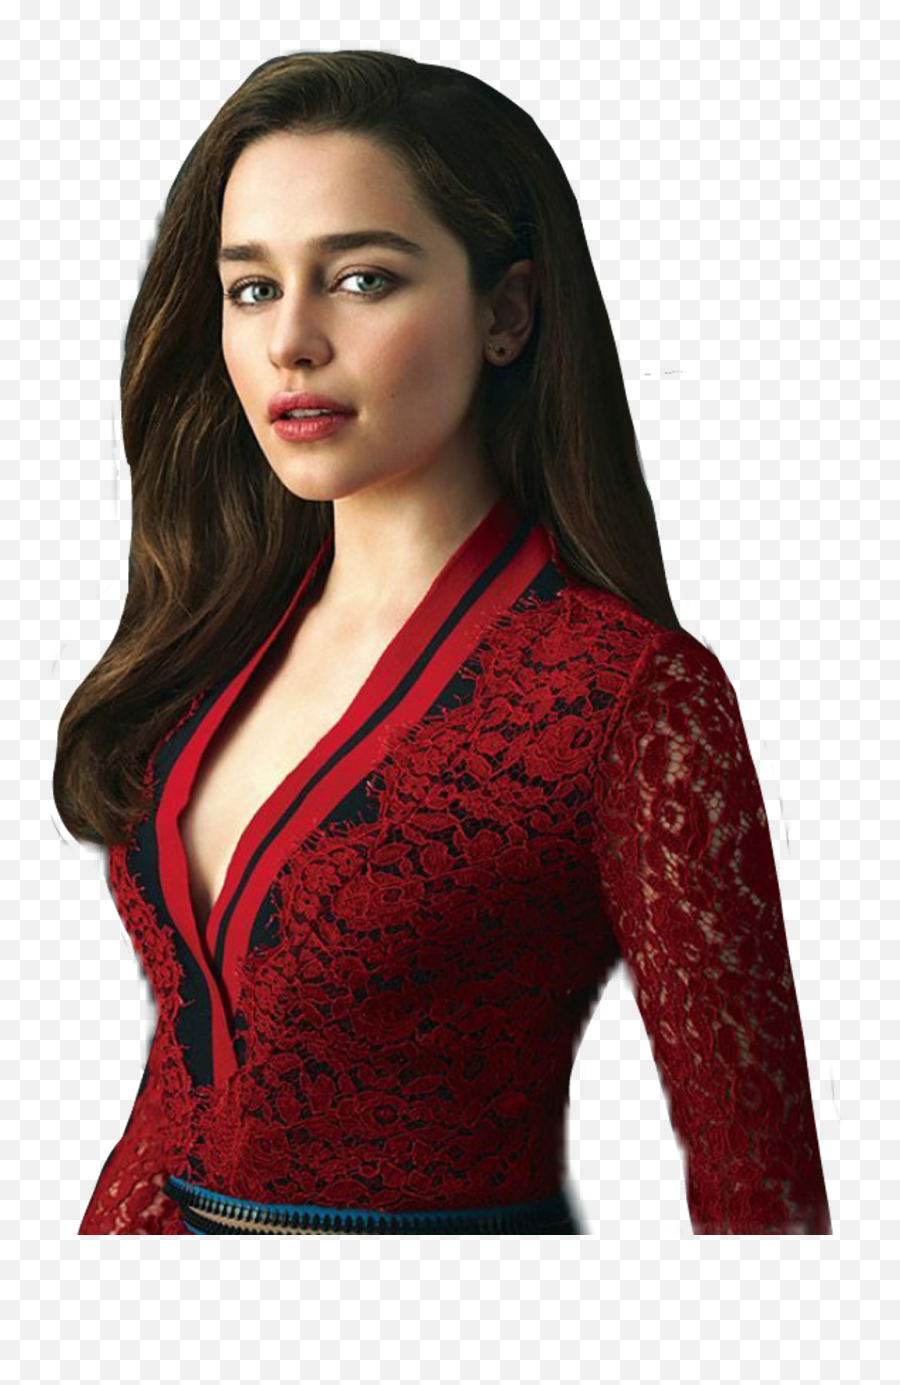 Emilia Clarke Red Dress - Emilia Clarke Red Dress Png,Red Dress Png